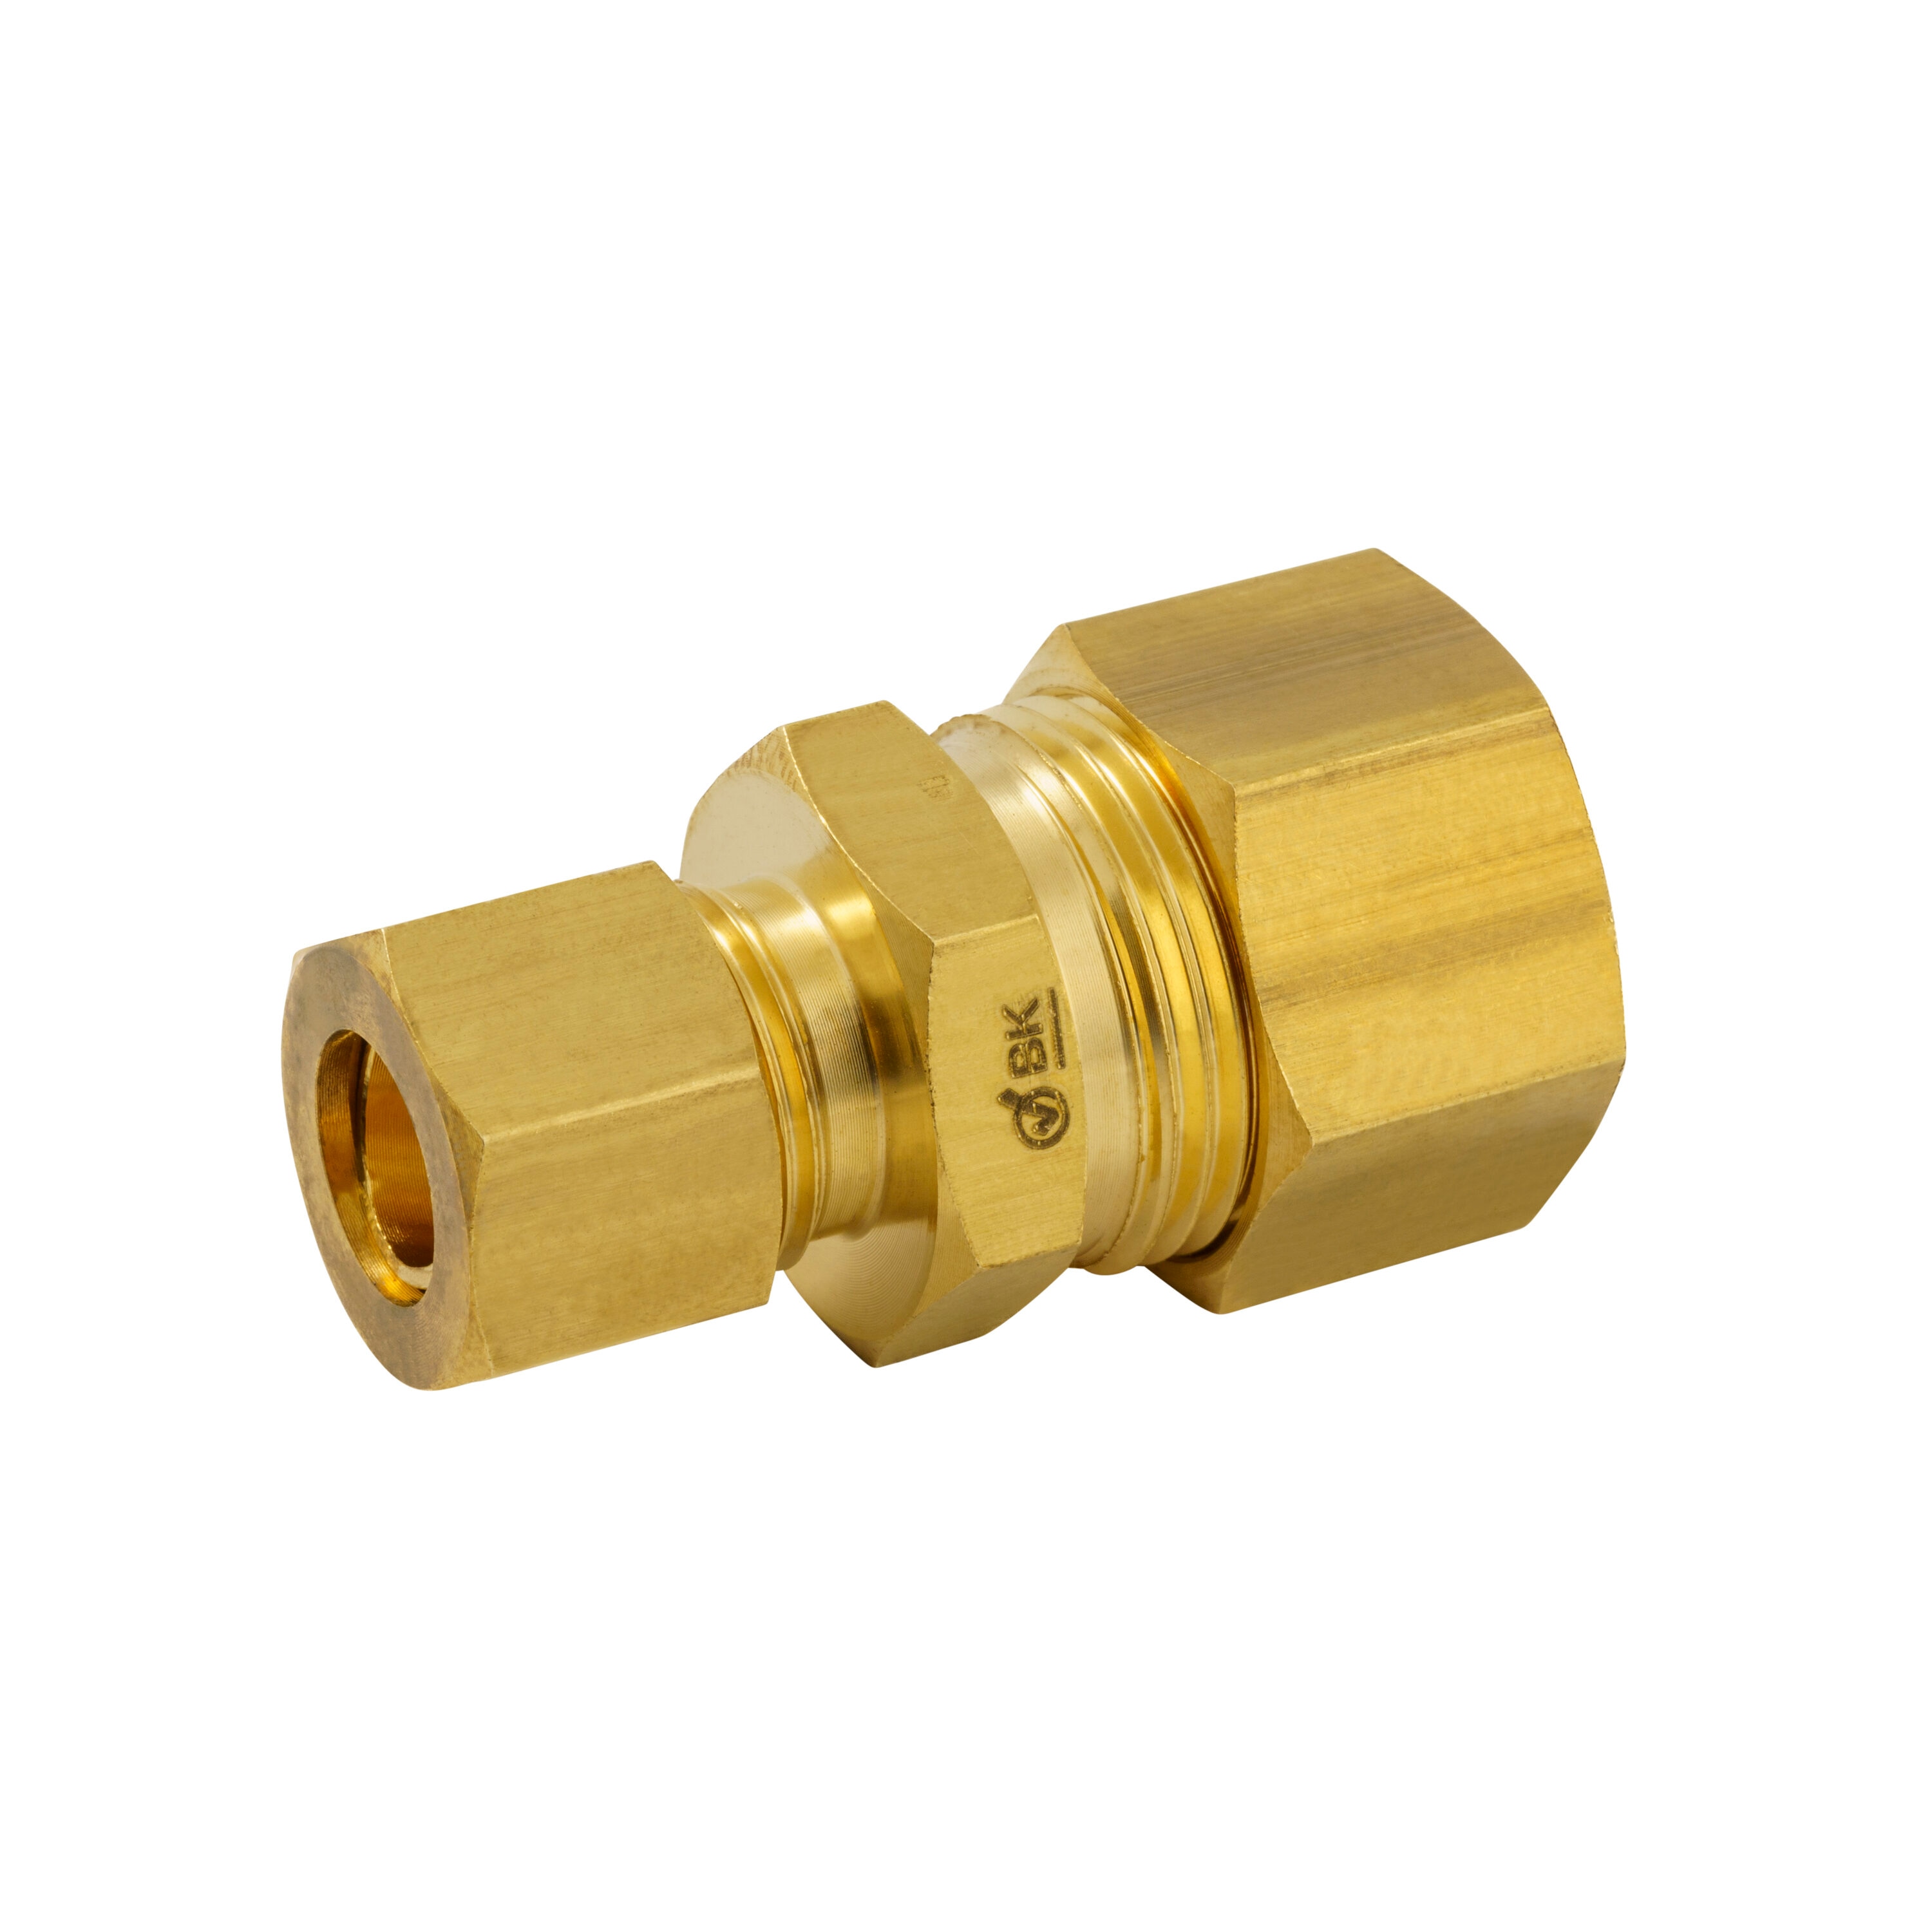 25) 3/16 OD Compression Union BRASS COMPRESSION FITTING 3/16 Size FROM USA